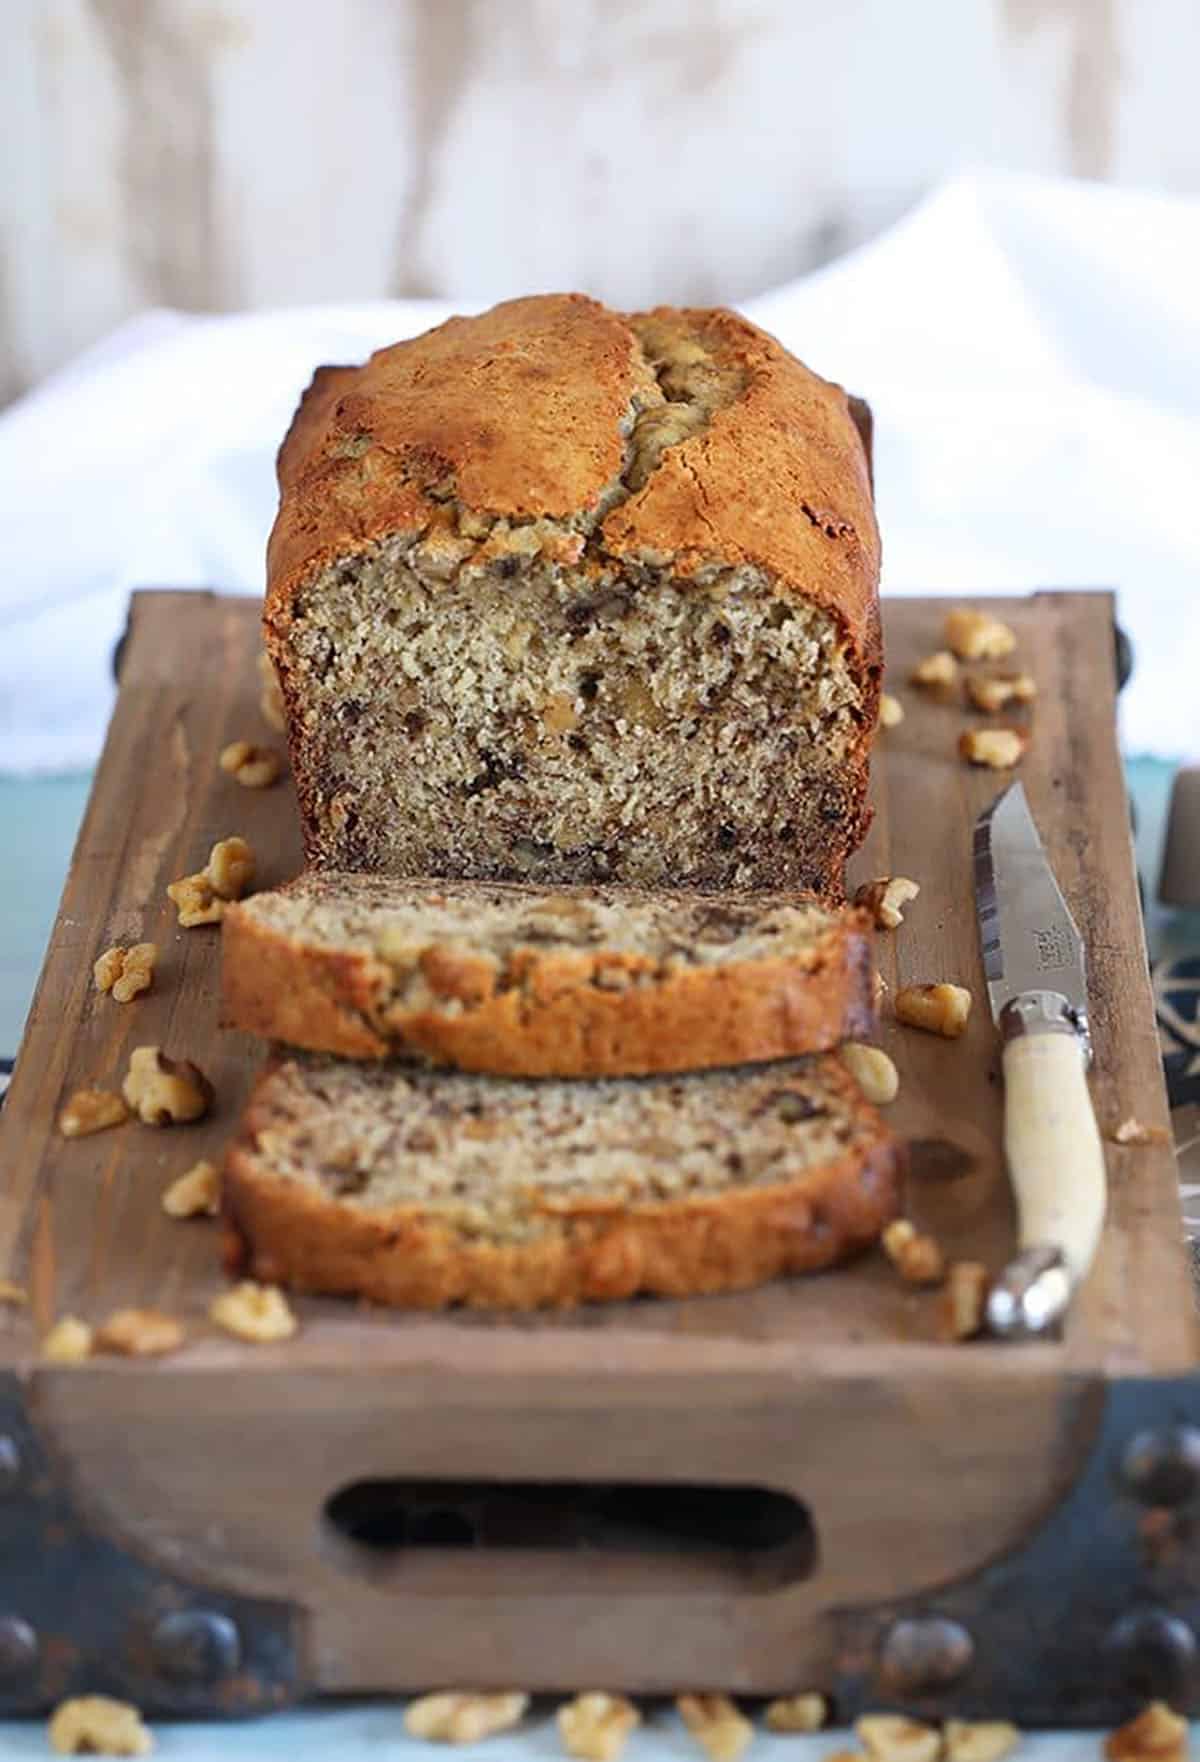 Banana Nut Bread on a wood tray with two slices and a knife.